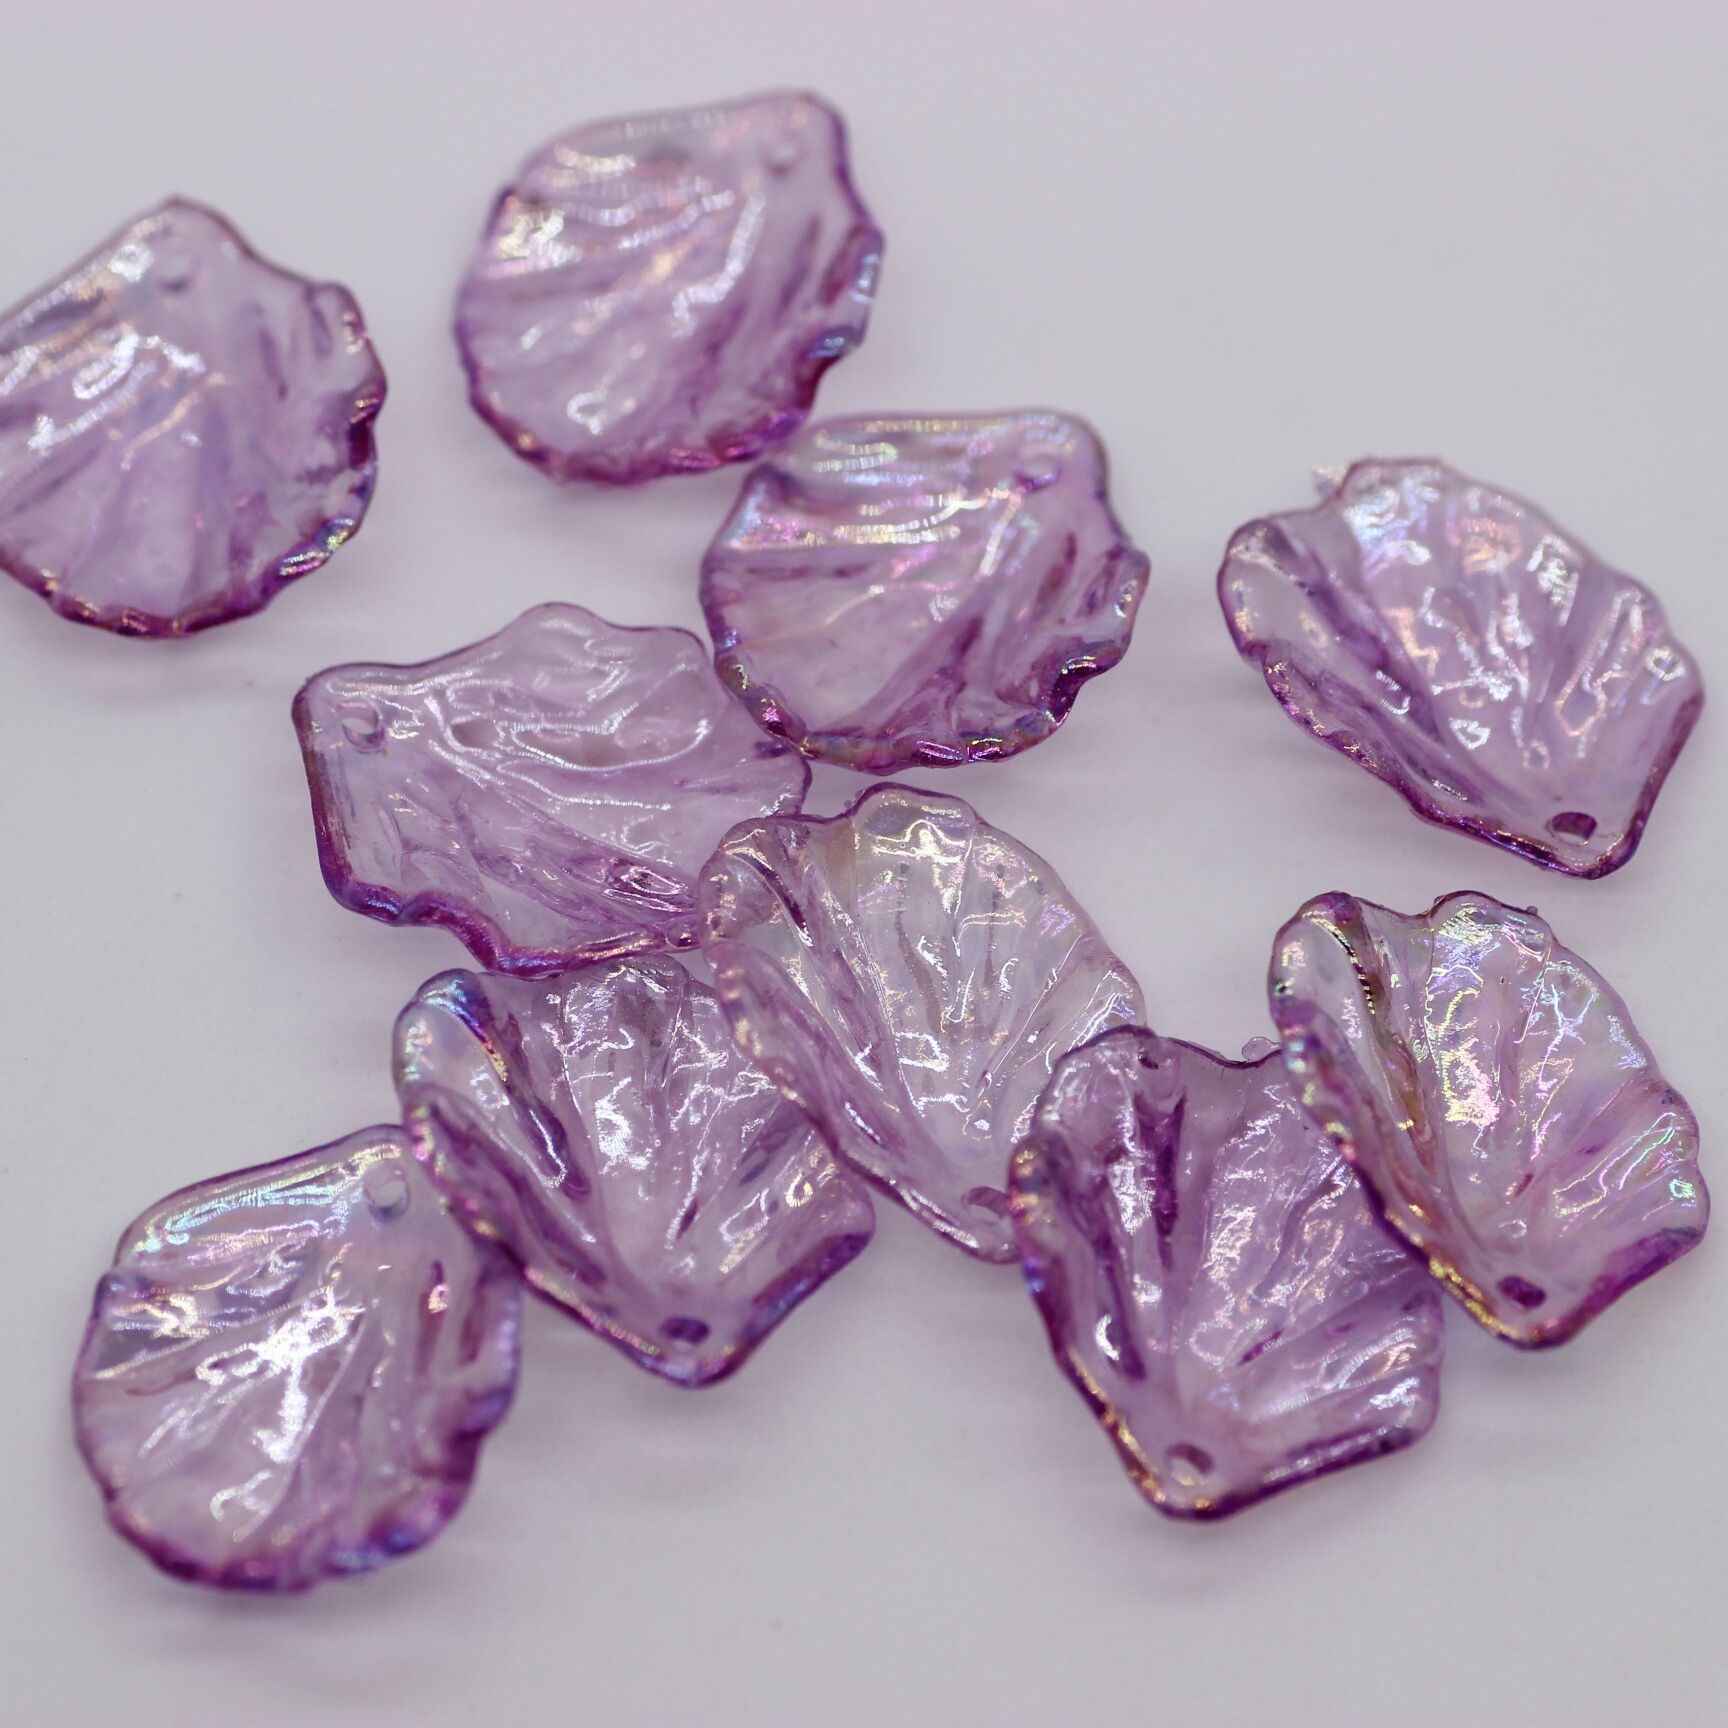 About 18 * 20 mm clear purple